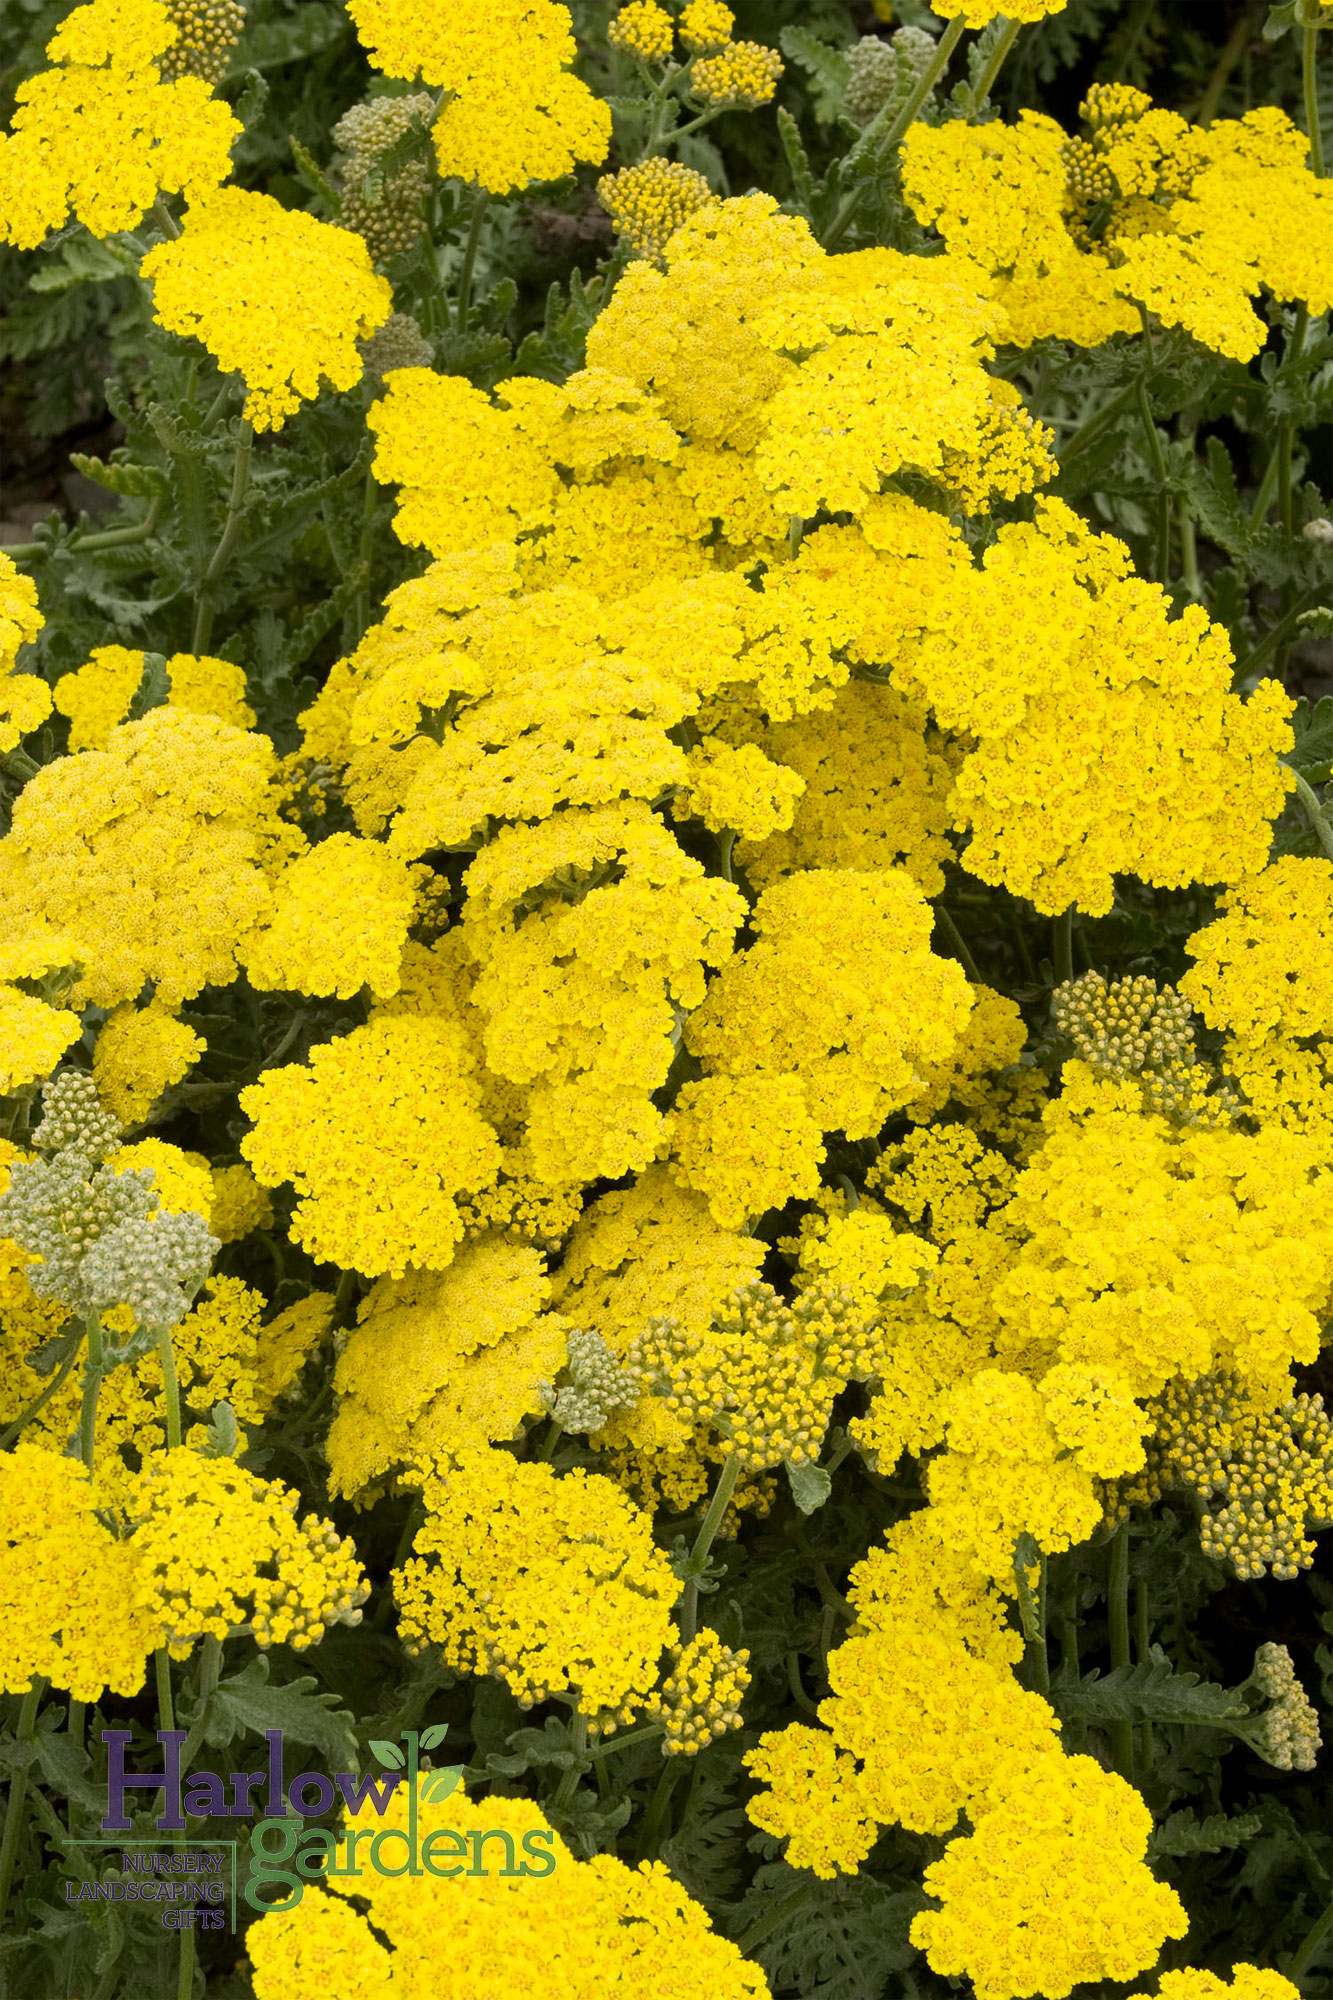 Yellow Yarrow for sale at Harlow Gardens Tucson.